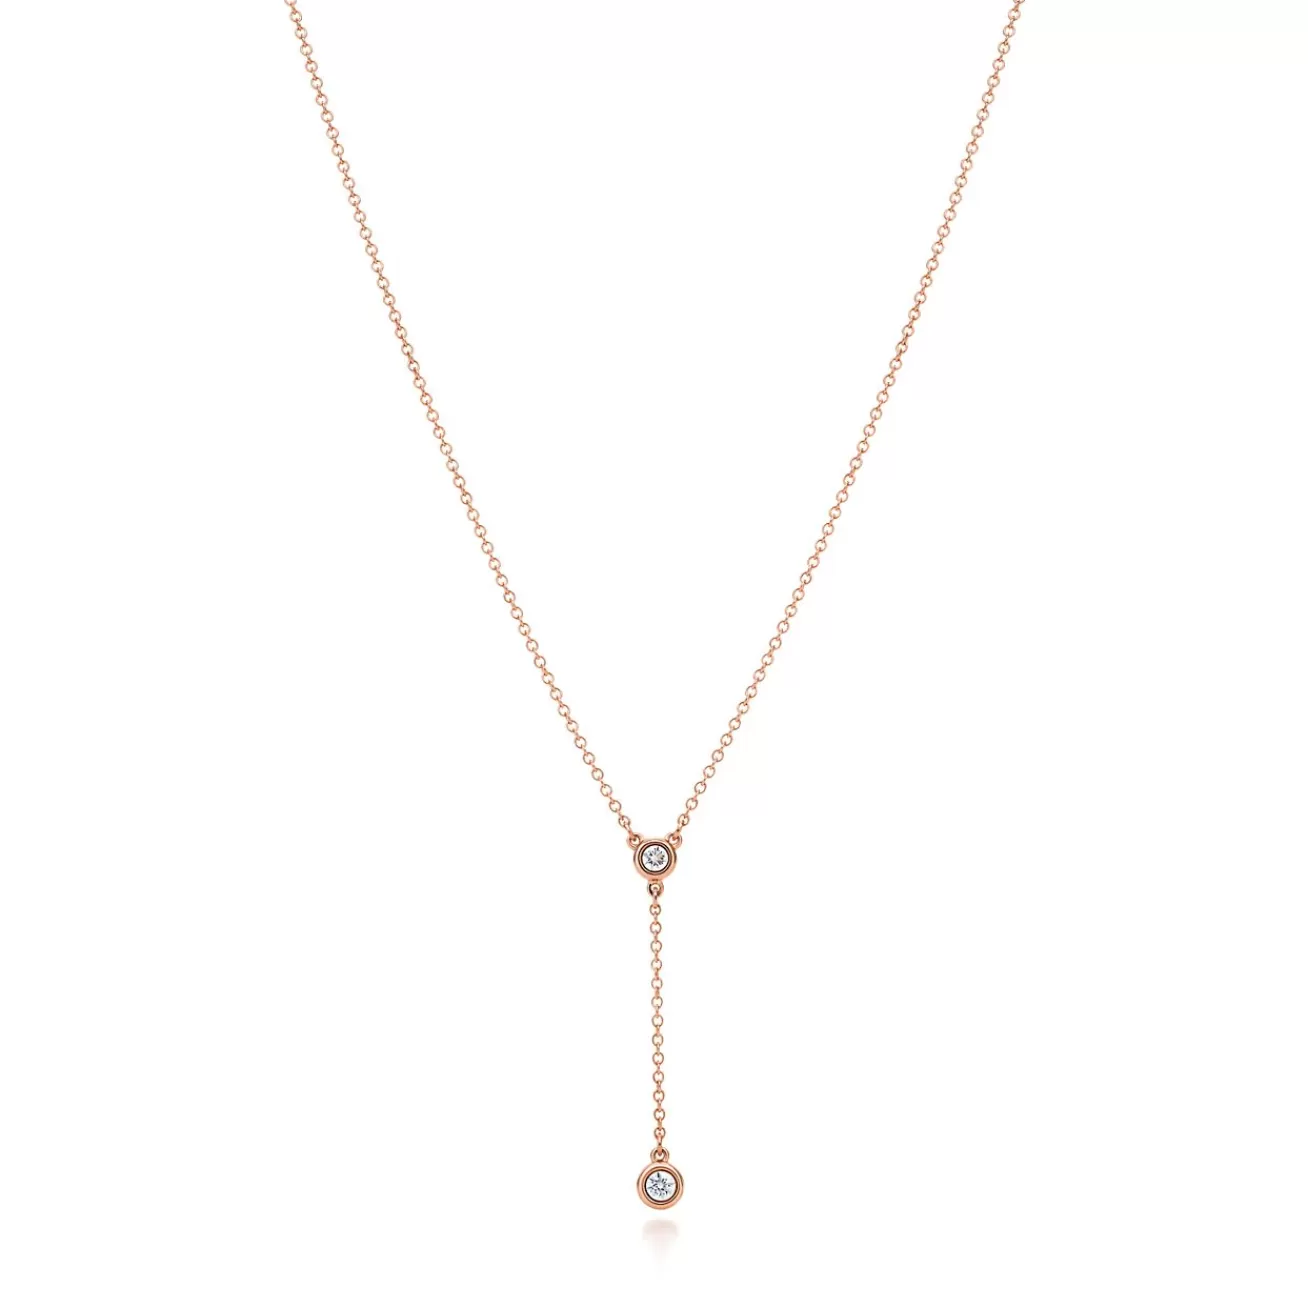 Tiffany & Co. Elsa Peretti® Diamonds by the Yard® necklace in 18k rose gold. | ^ Necklaces & Pendants | Rose Gold Jewelry